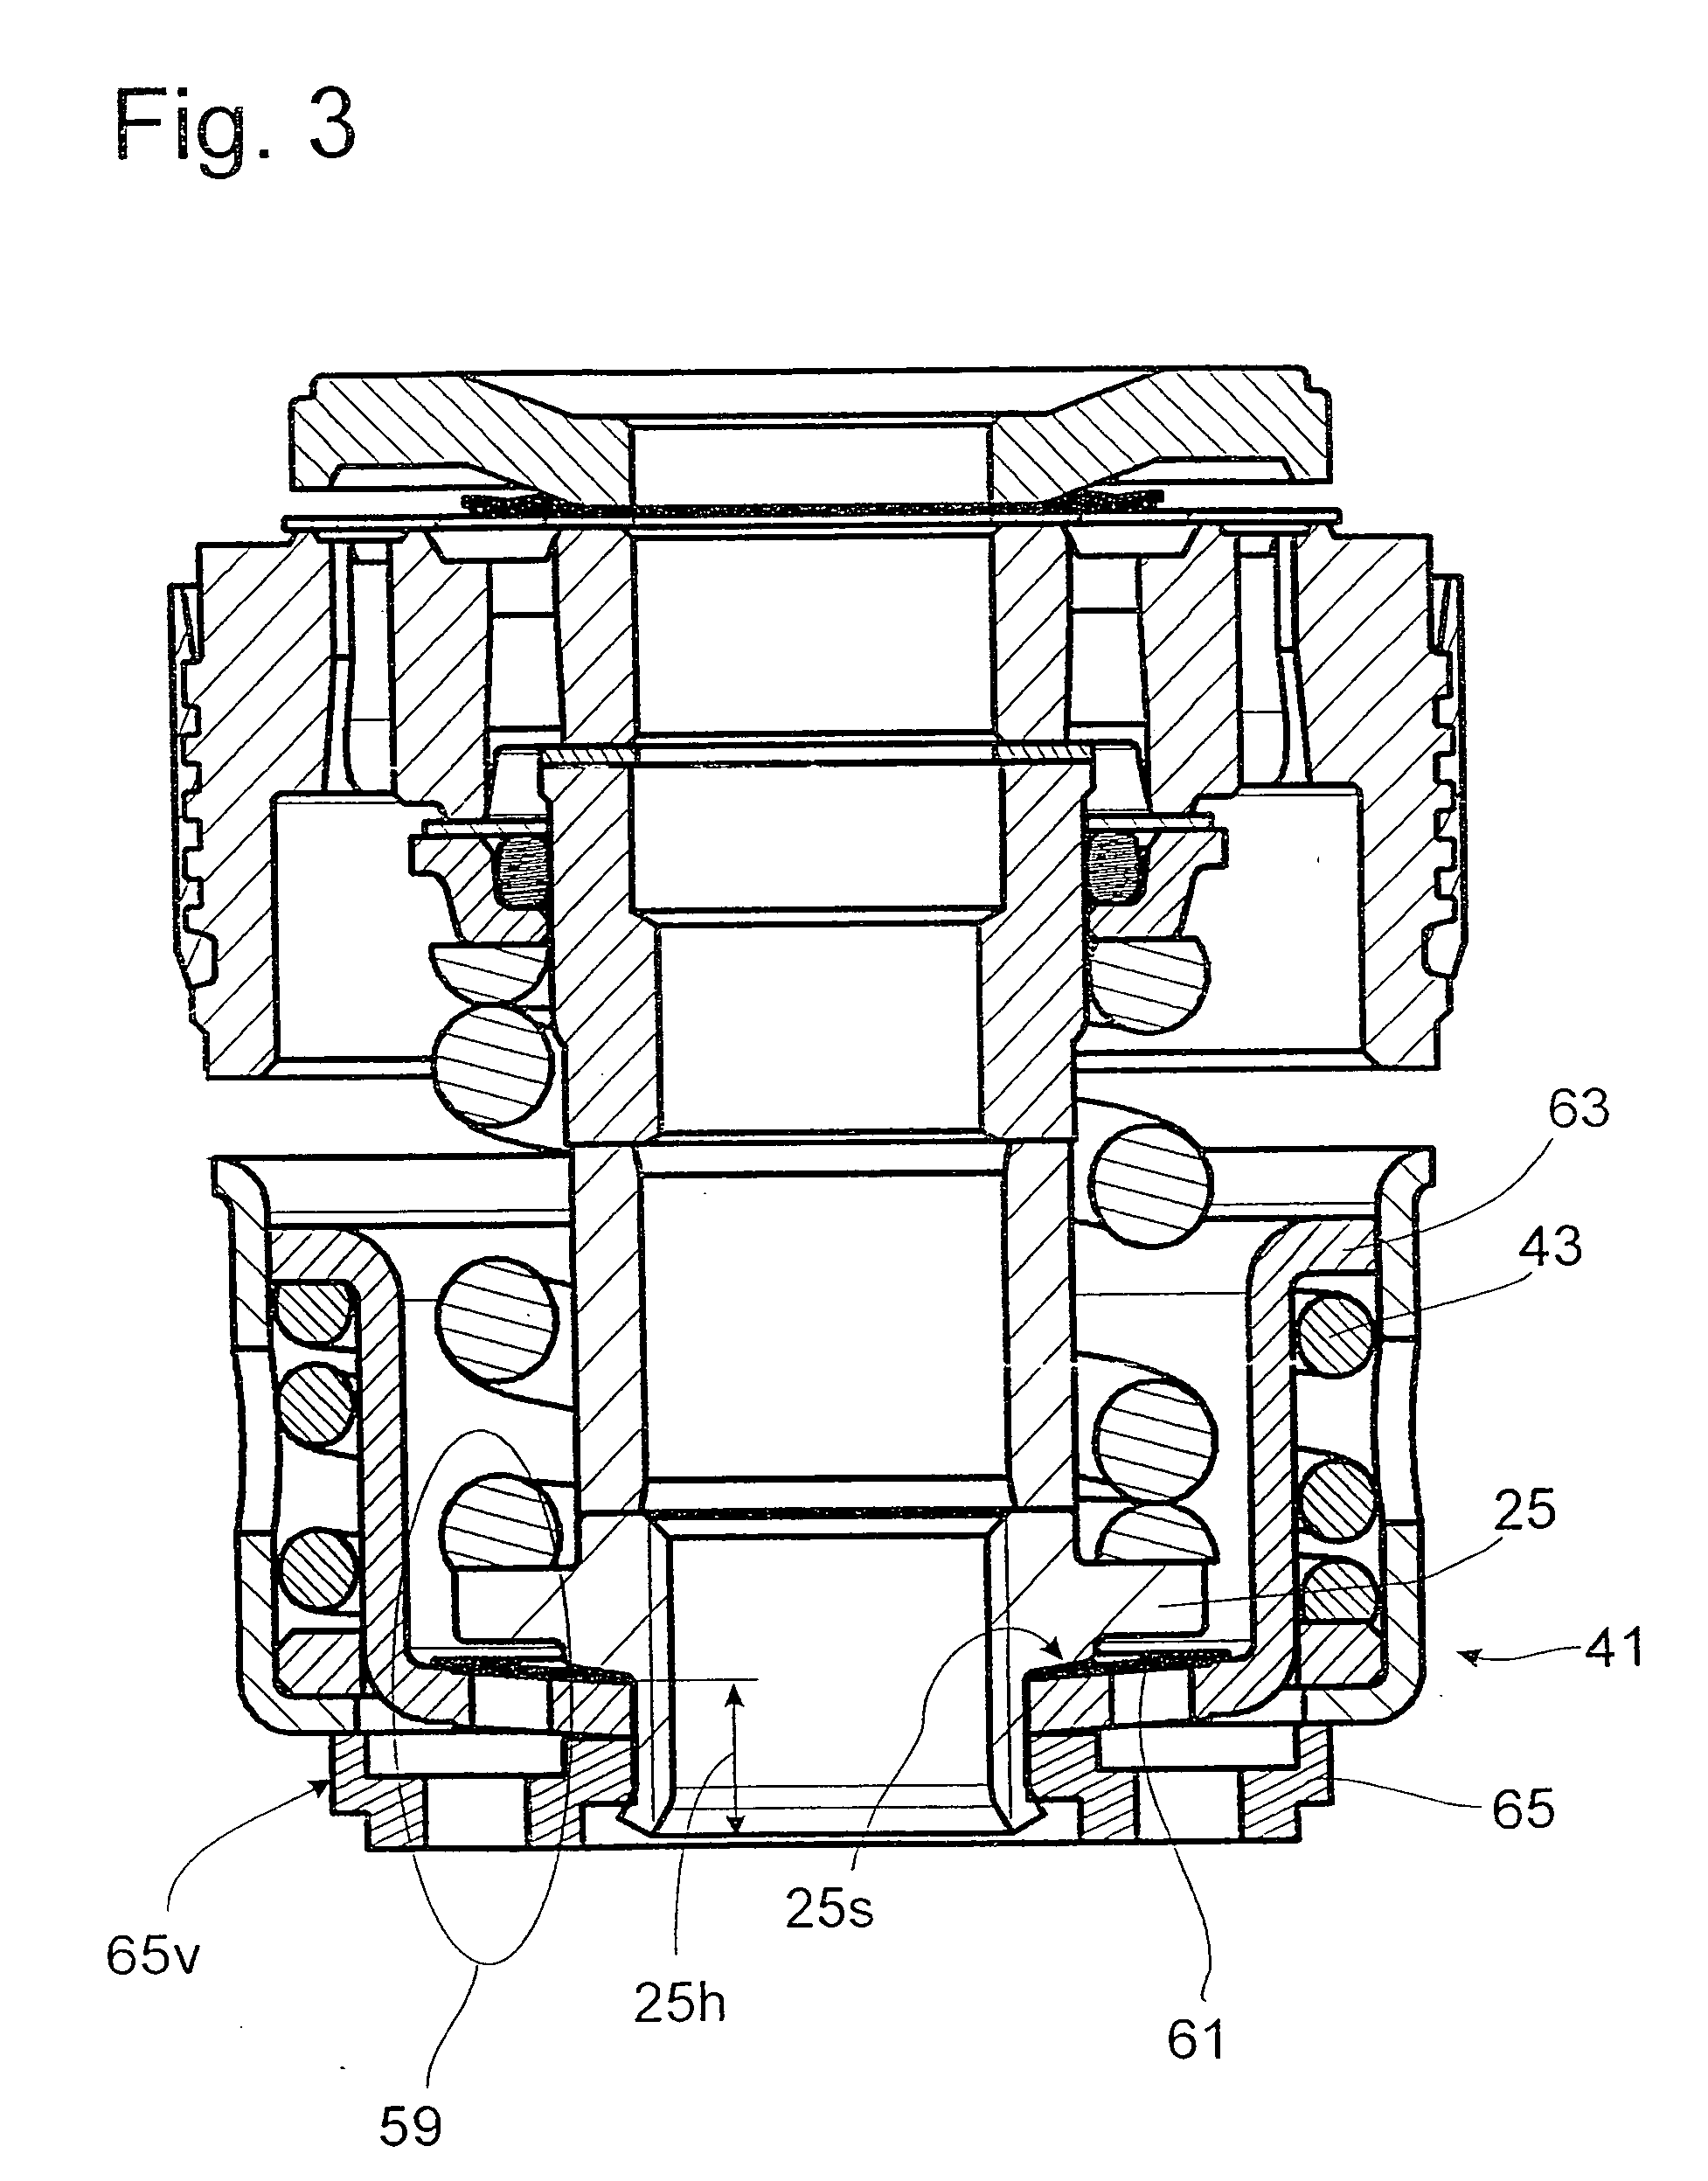 Damping valve assembly with a progressive damping force characteristic